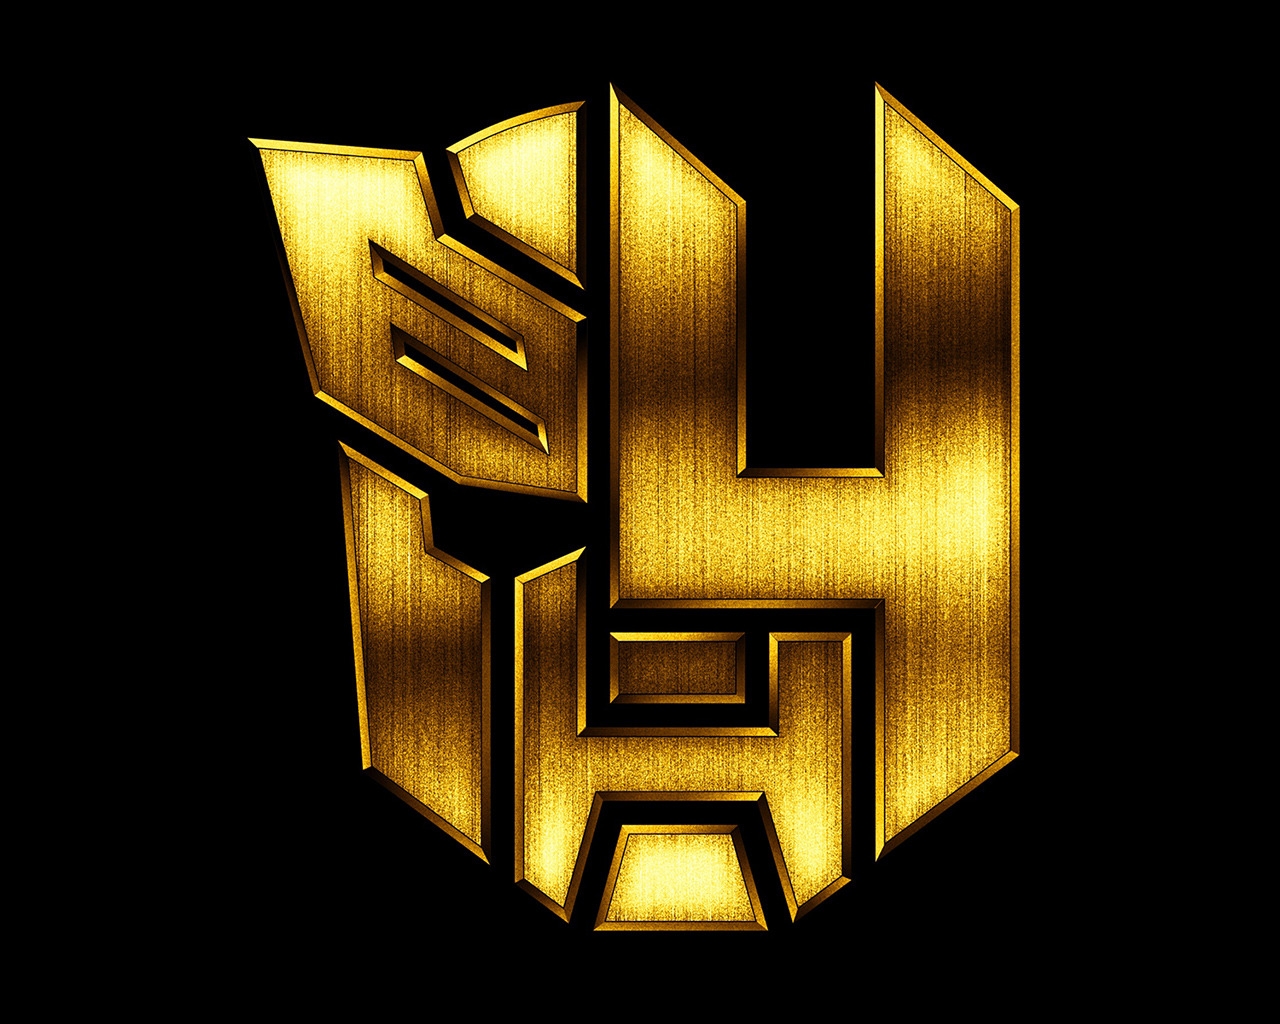 Transformers 4 Age of Extinction 2014 for 1280 x 1024 resolution